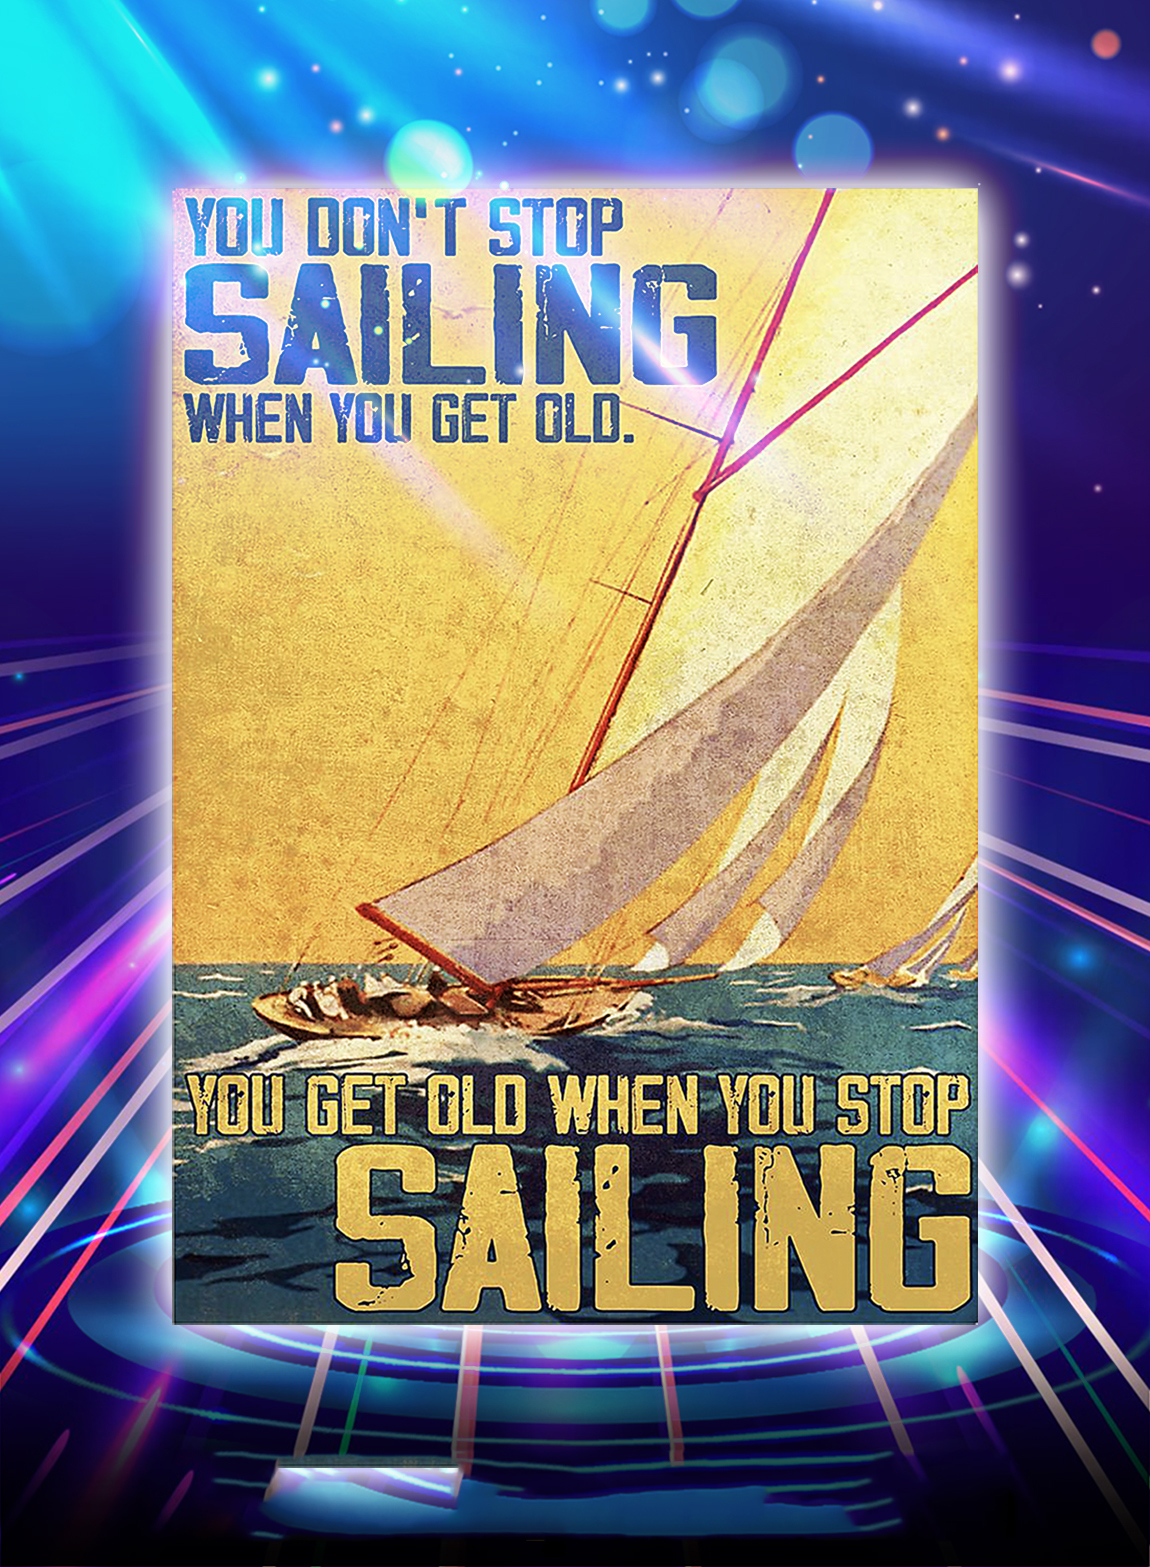 You don't stop sailing when you get old you get old when you stop sailing poster - A2